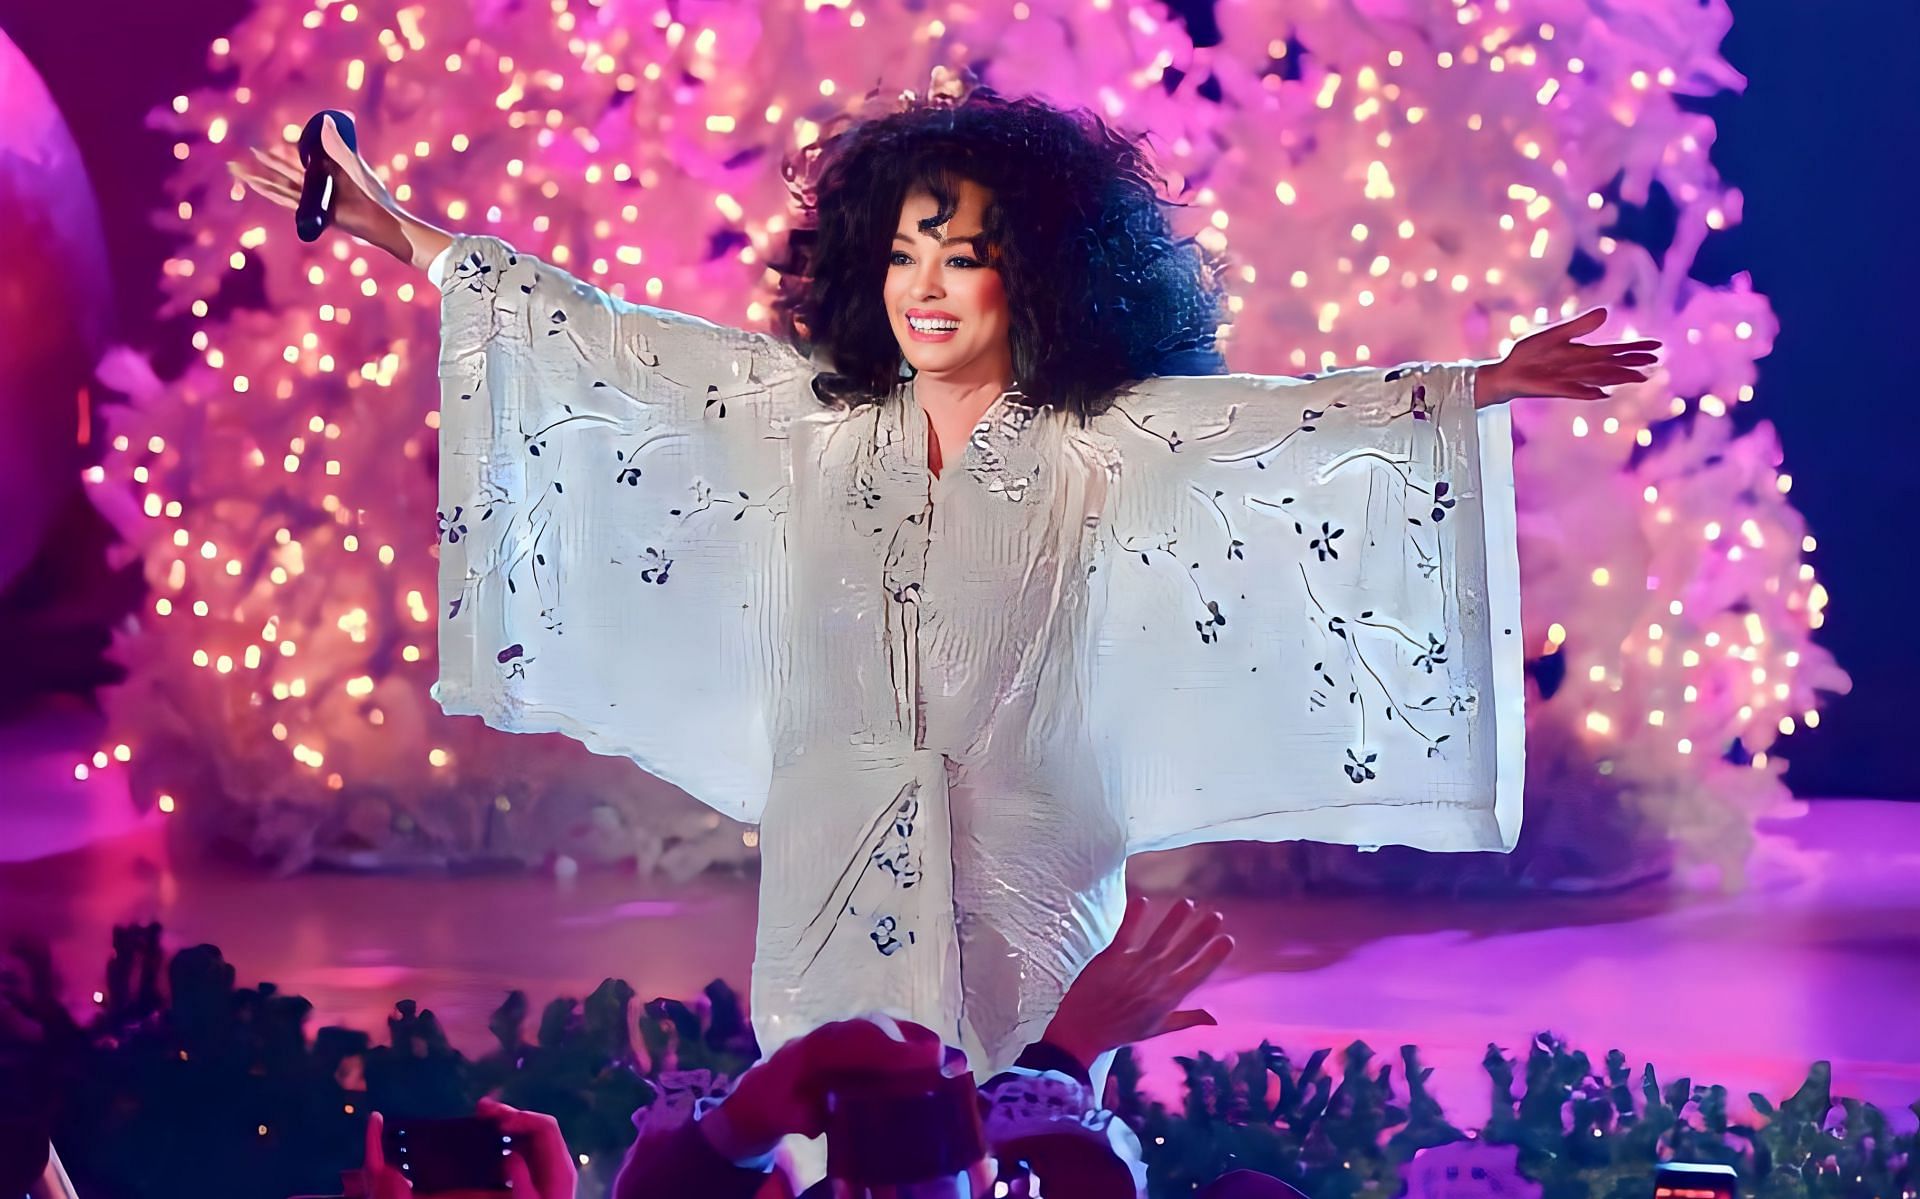 Diana Ross' The Music Legacy UK tour 2023 Tickets, dates, venues, & more